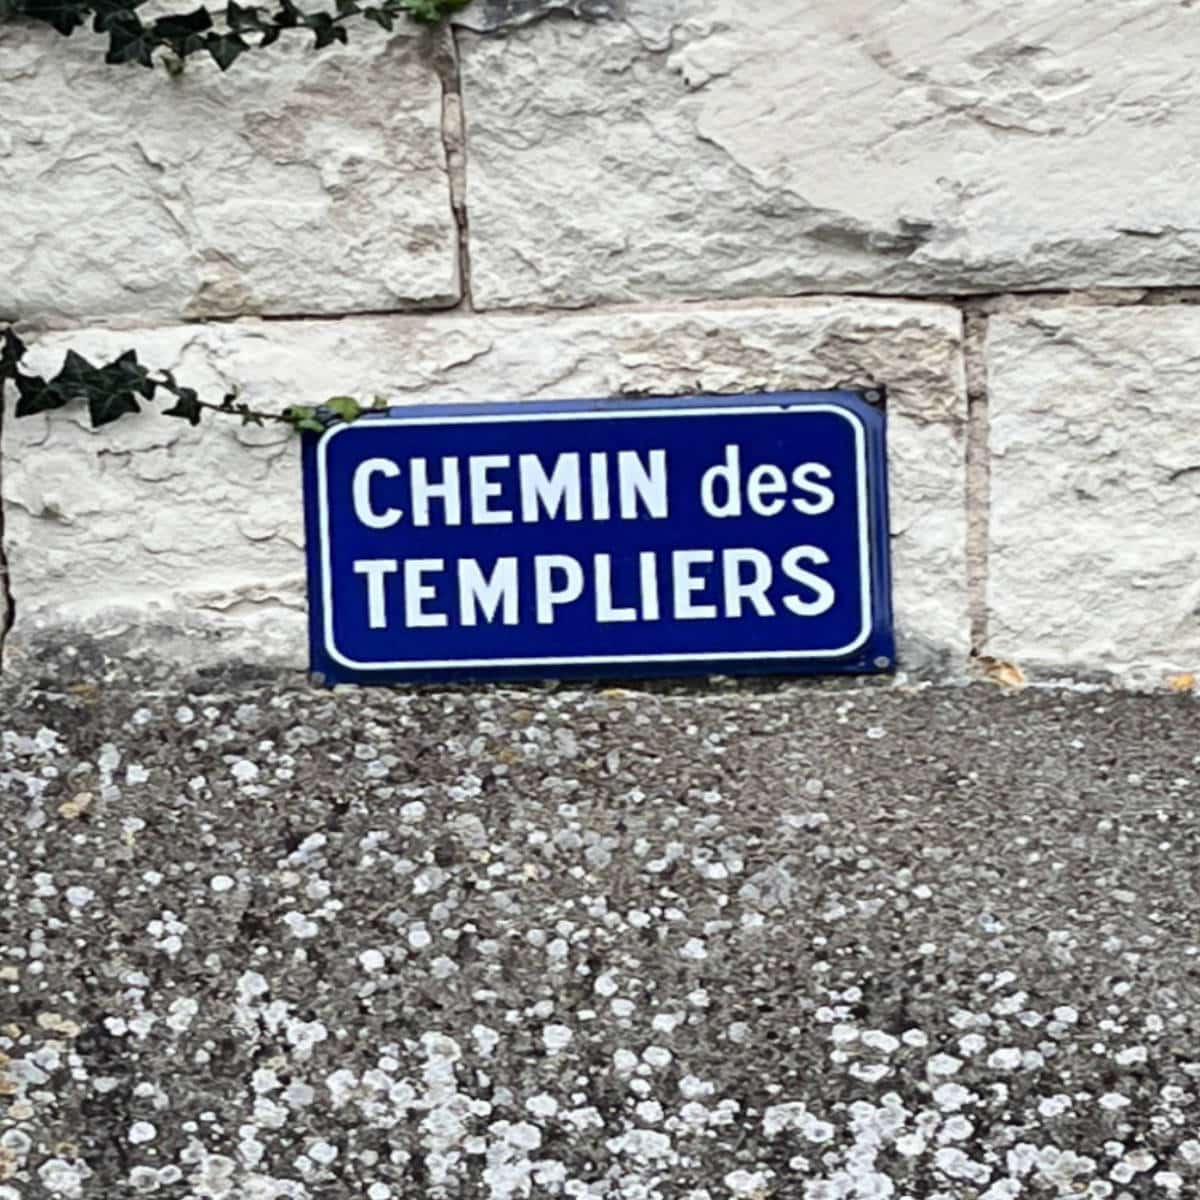 Chemin des Templiers - street sign in France